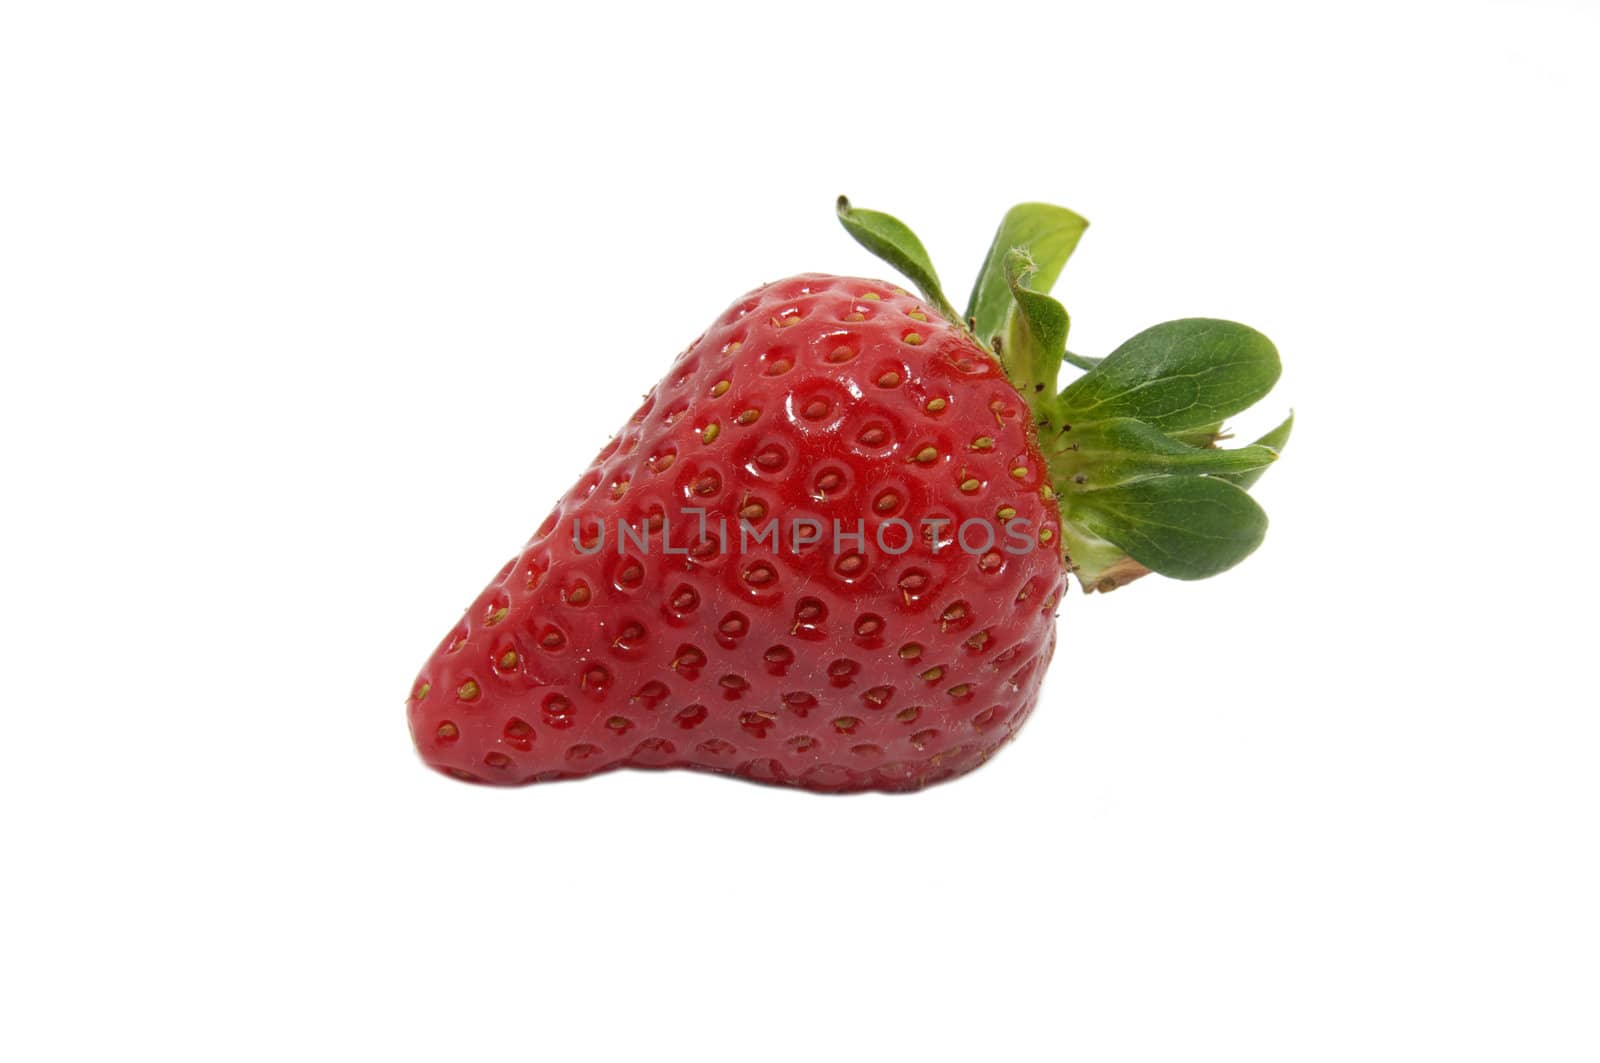 large ripe strawberries on a white background